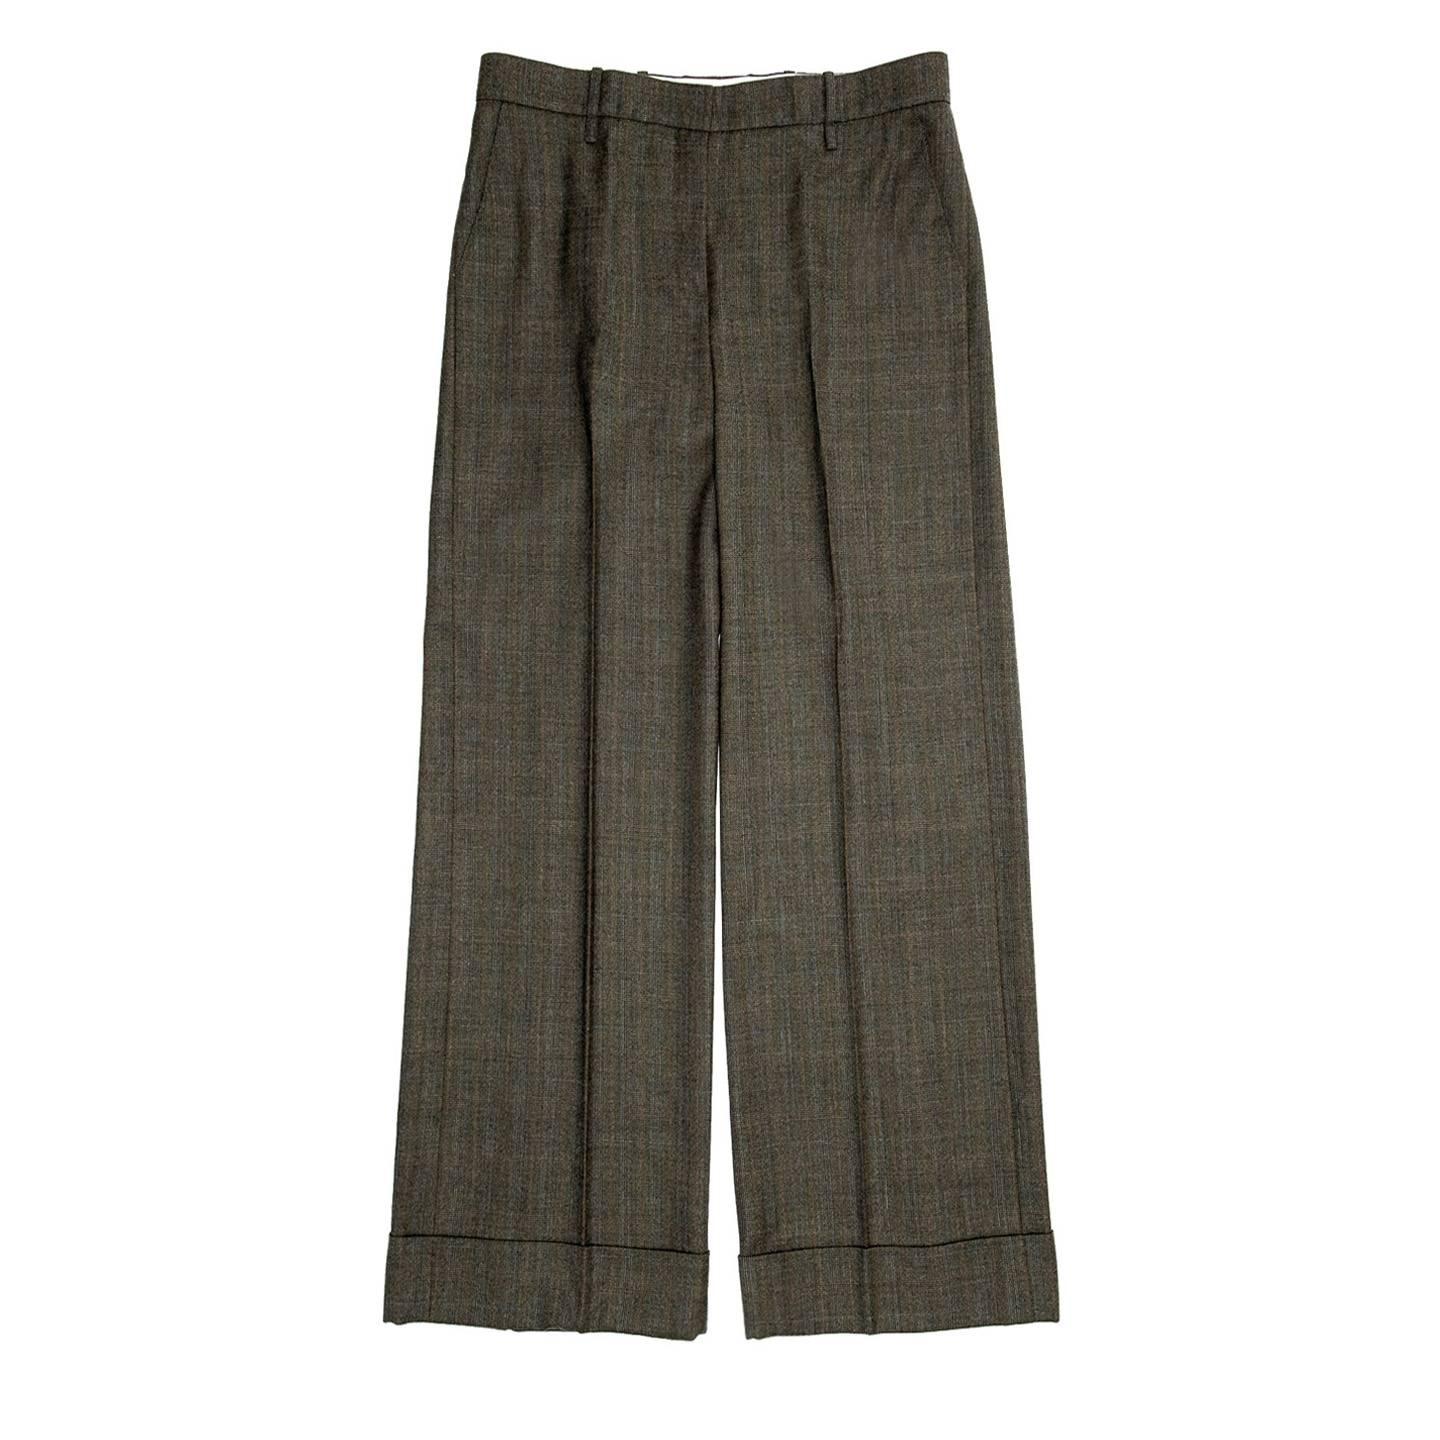 Musk green/blue/orange checked wool trousers with very wide legs and turn-ups at hem. The pants are pleated, the front is flat and a hidden hook fastens the waist band, which is enriched by detailed belt loops. Slash pockets sit at front while the